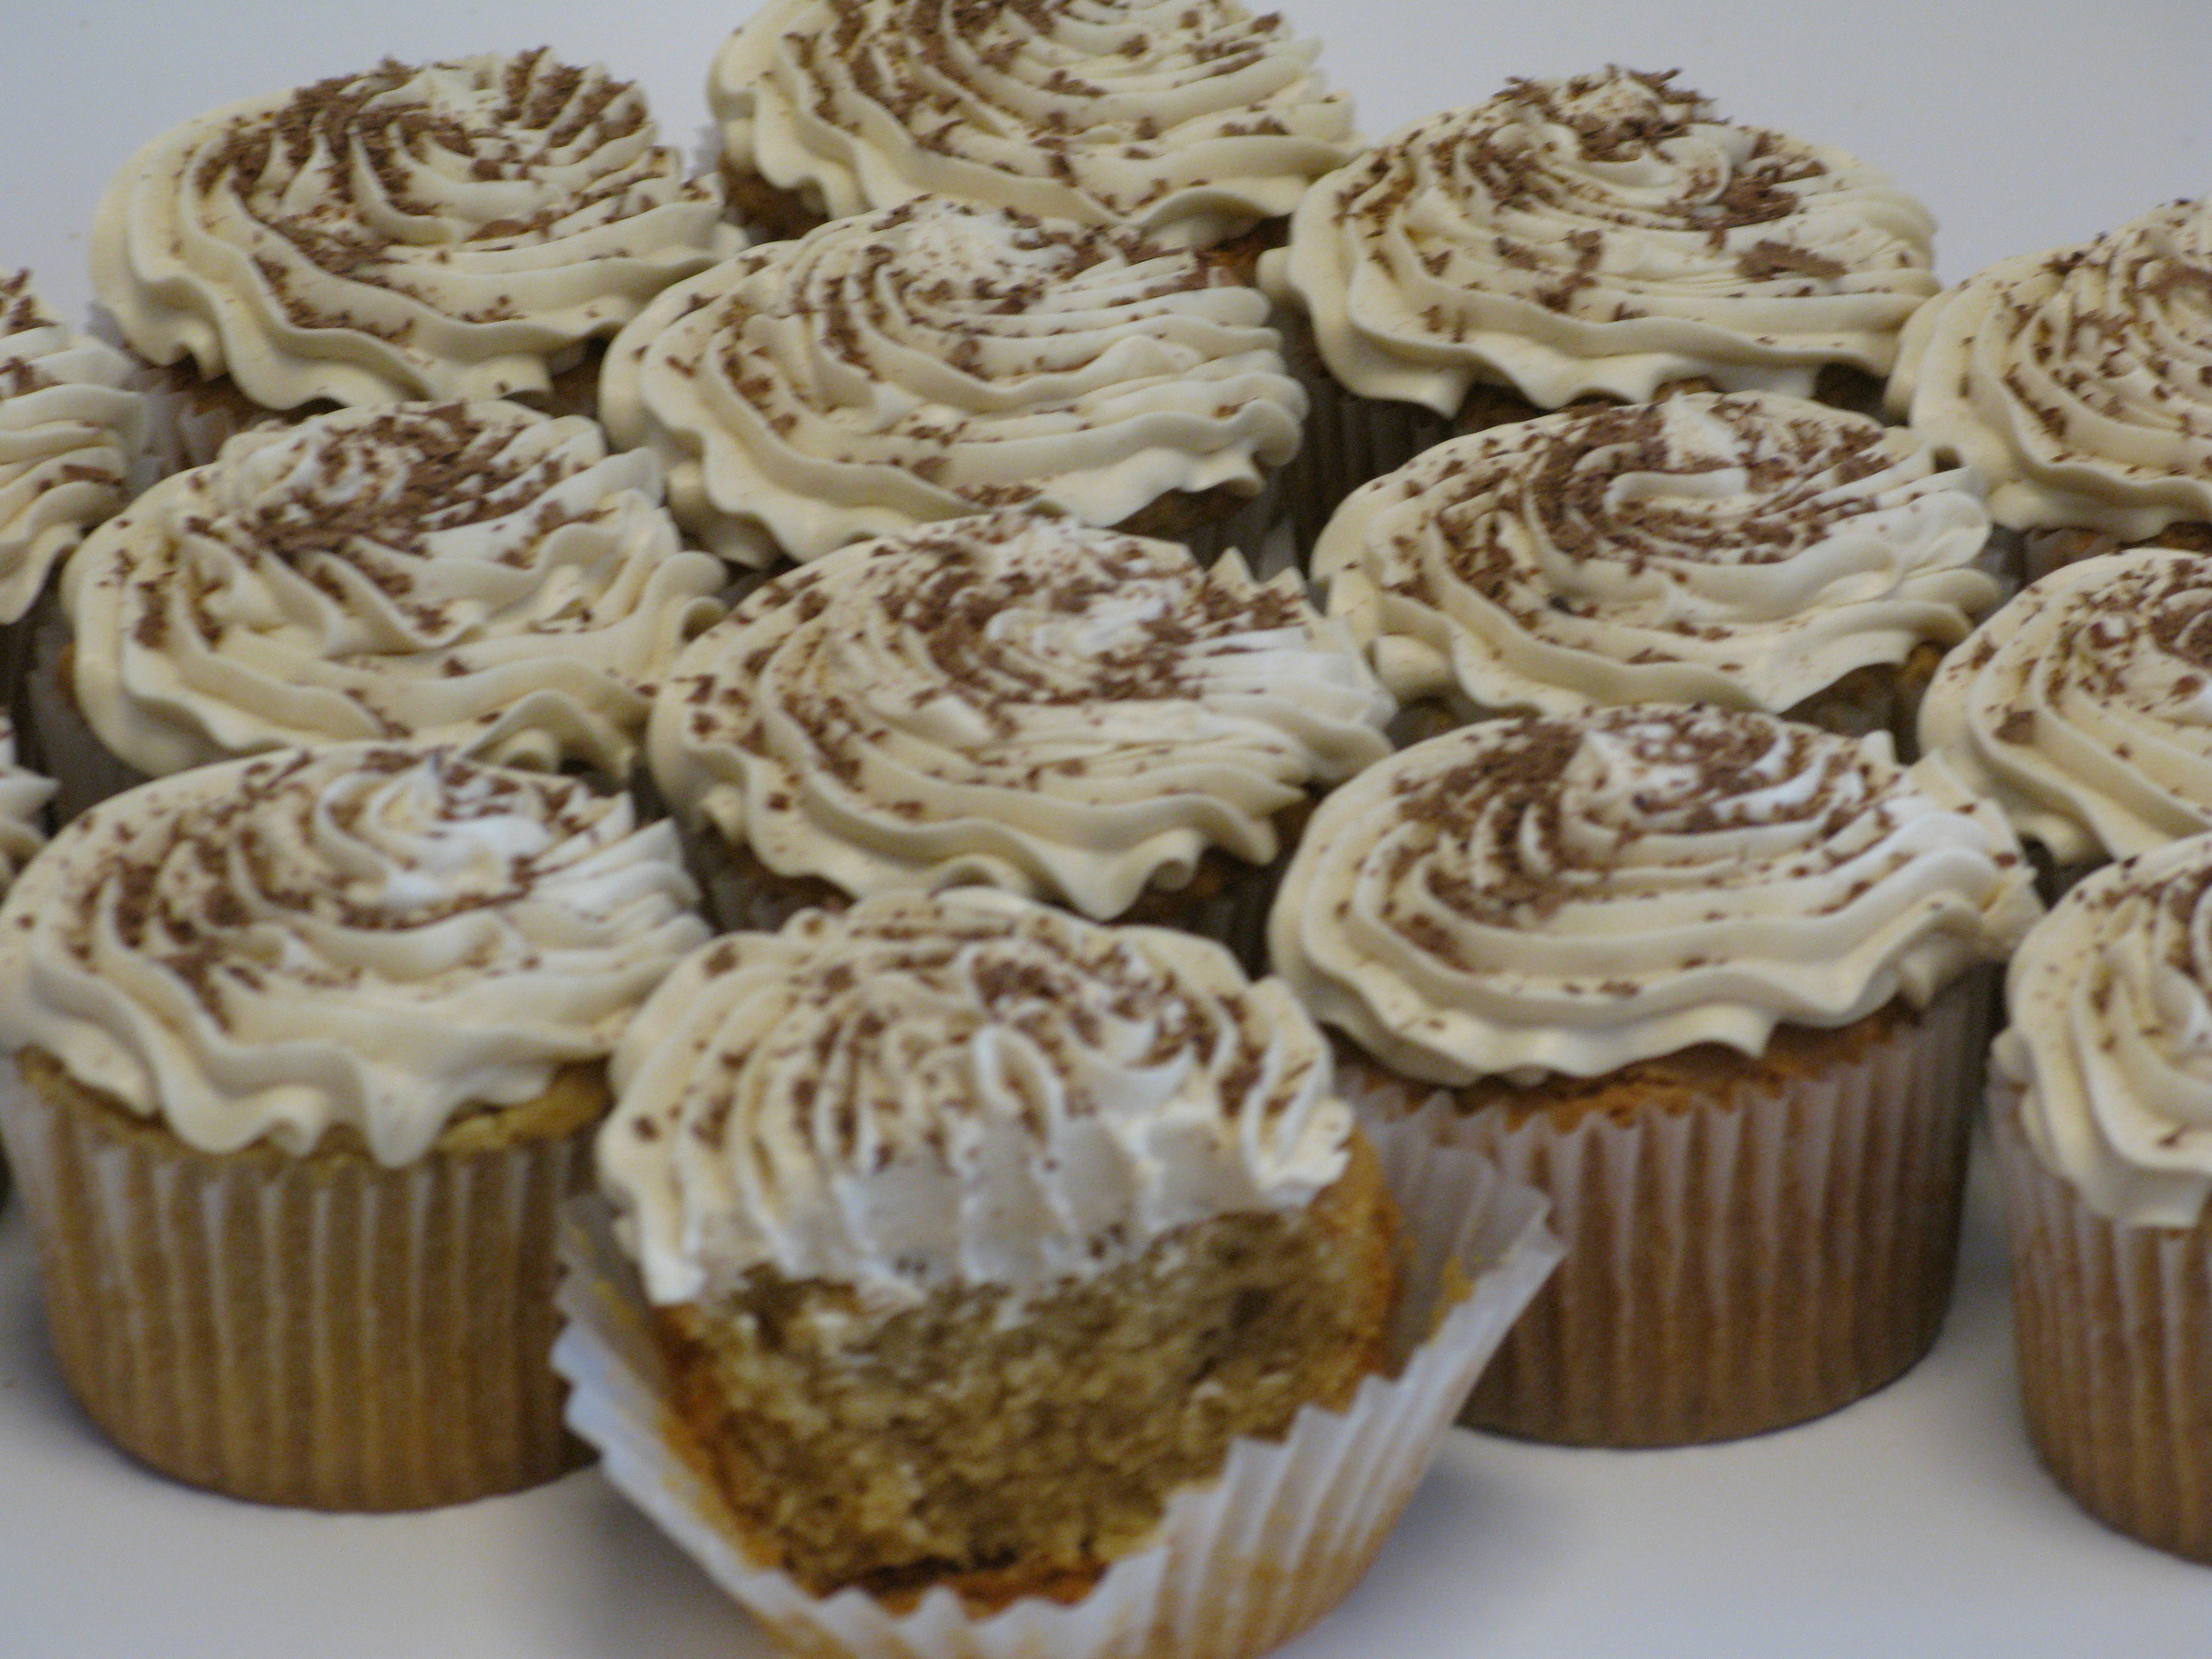 the combining  cupcake deliciously of cake This rich, flavors is coffee  and tiramisu using cake mix